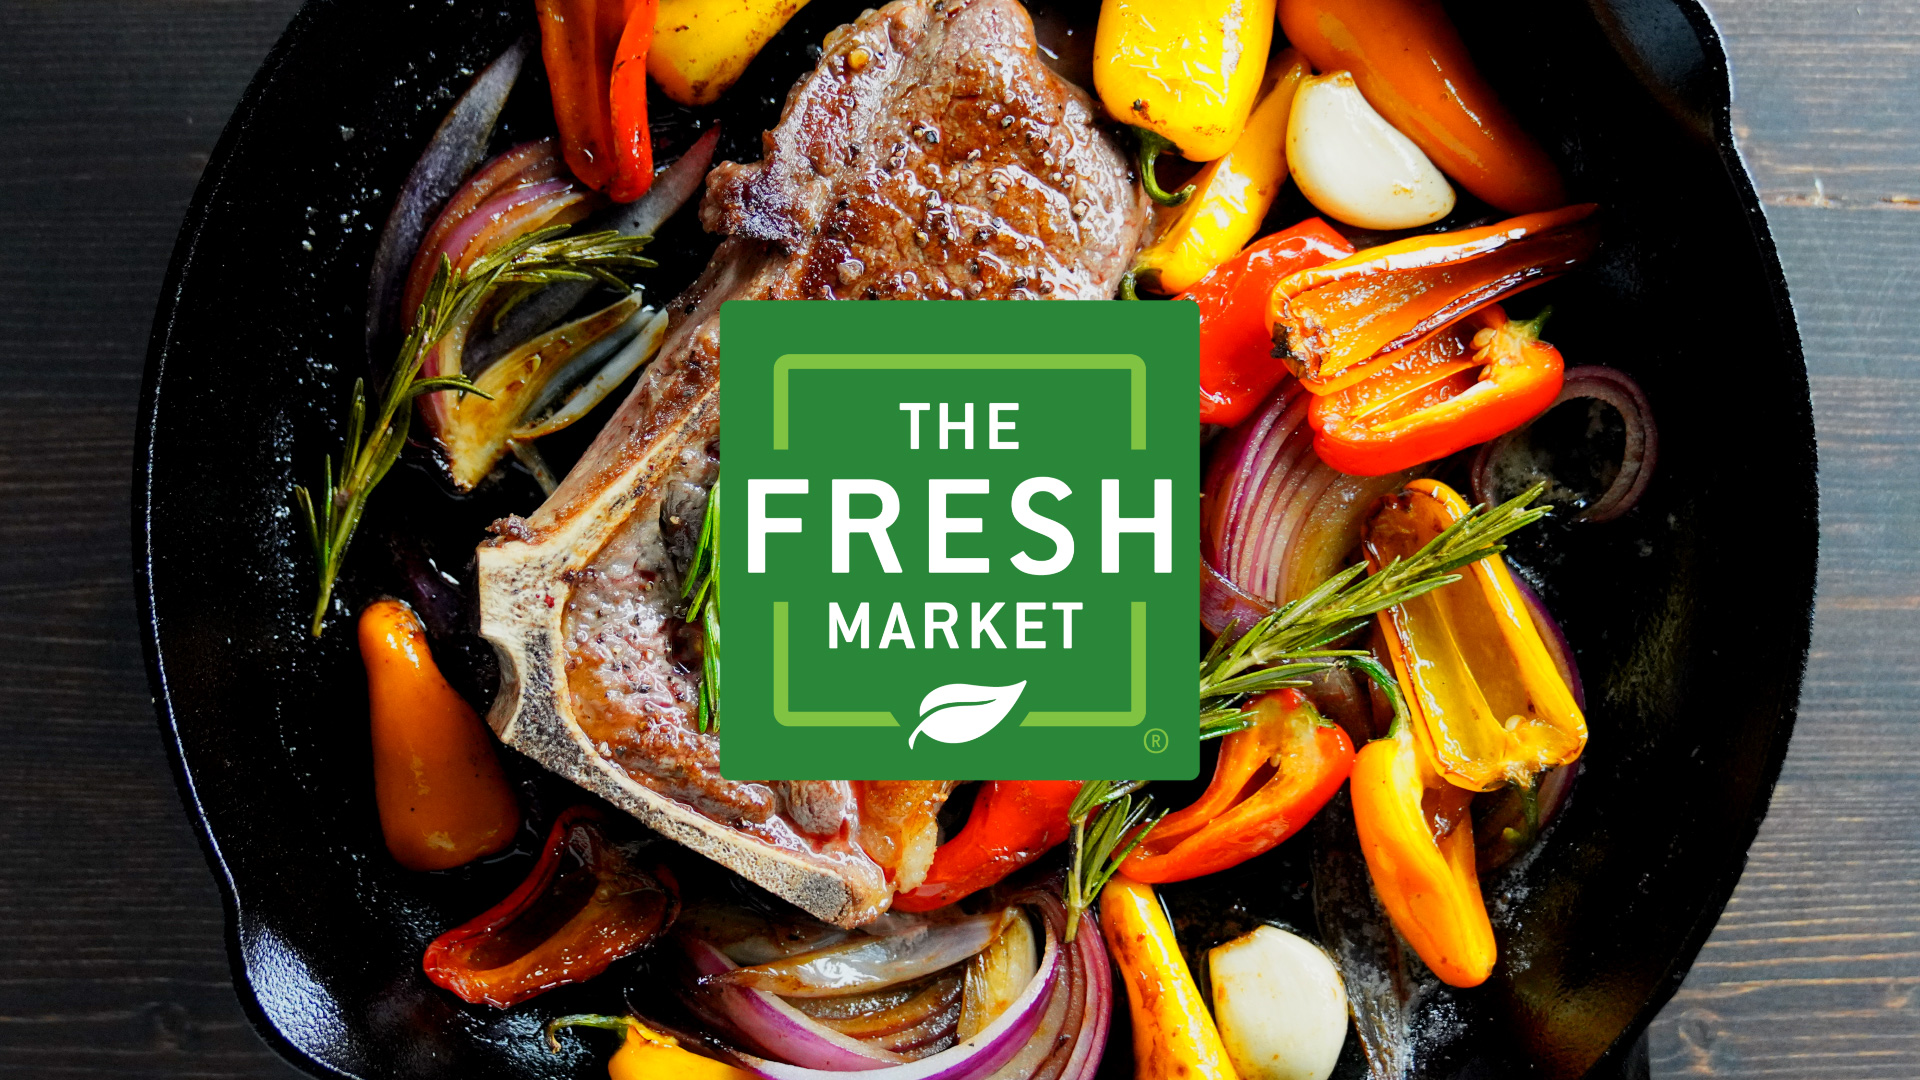 The Fresh Market food photography ad by K2 Productions